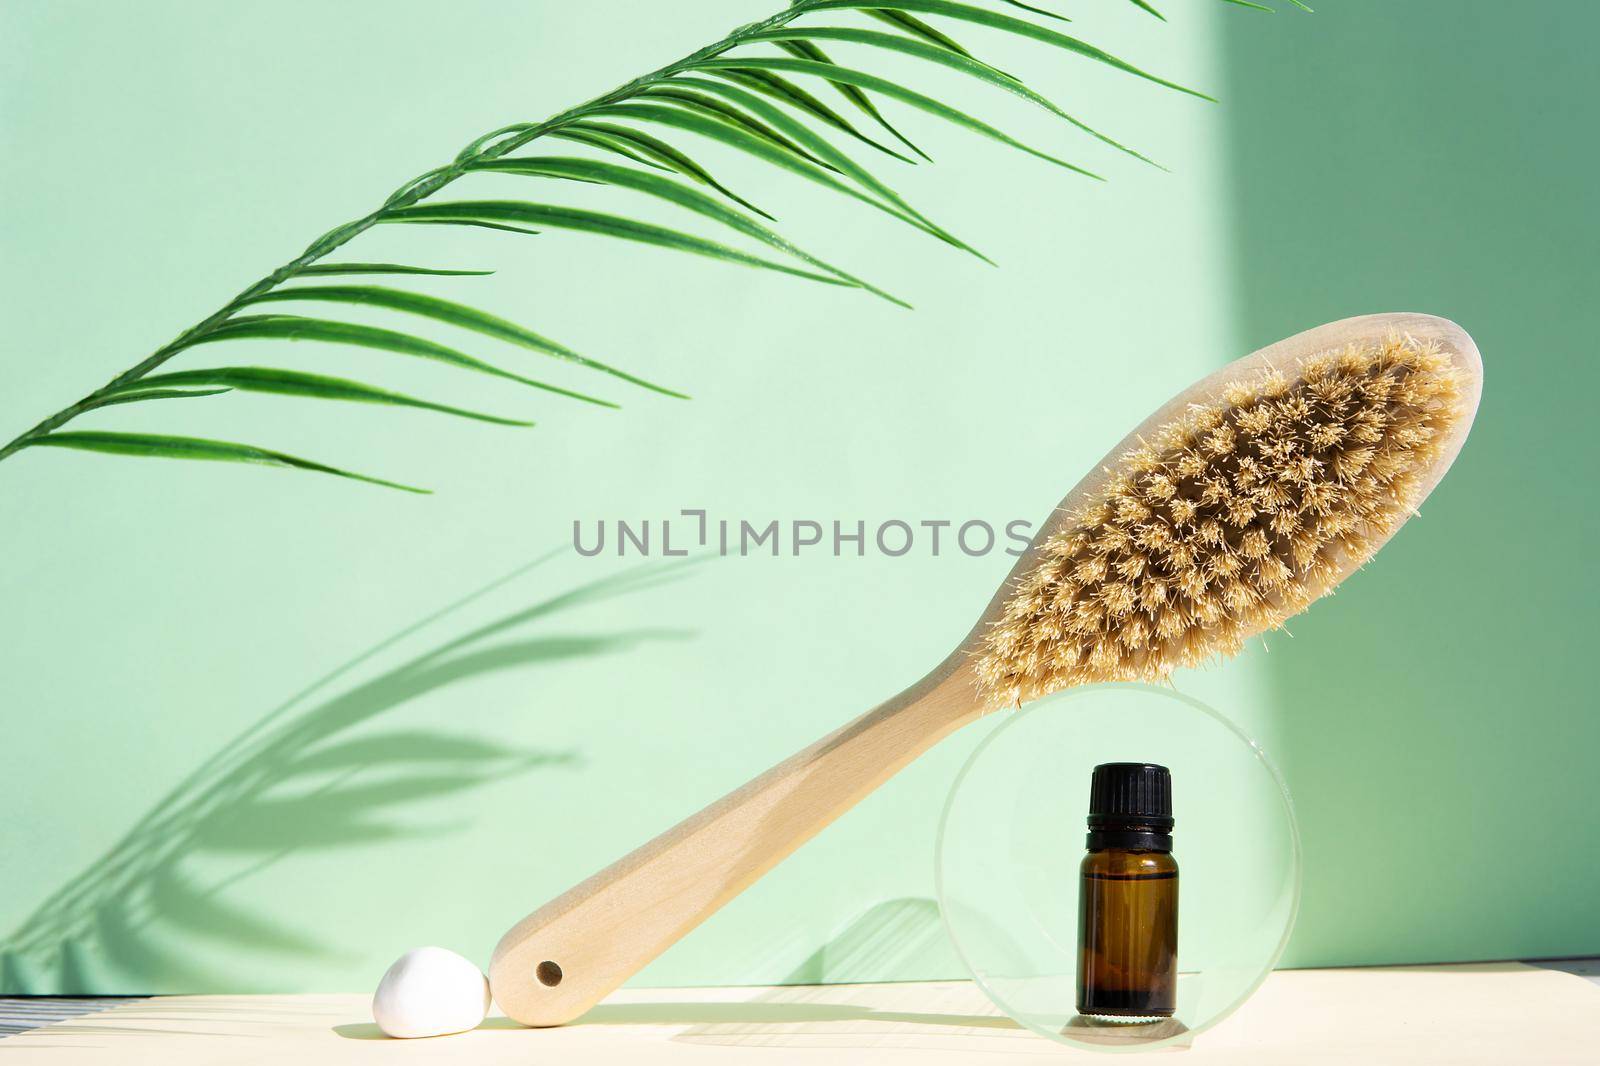 Cactus bristle brush for anti-cellulite massage and massage oil on a green background. The concept of body care. Spa, eco-beauty treatments, beauty and fashion concept.